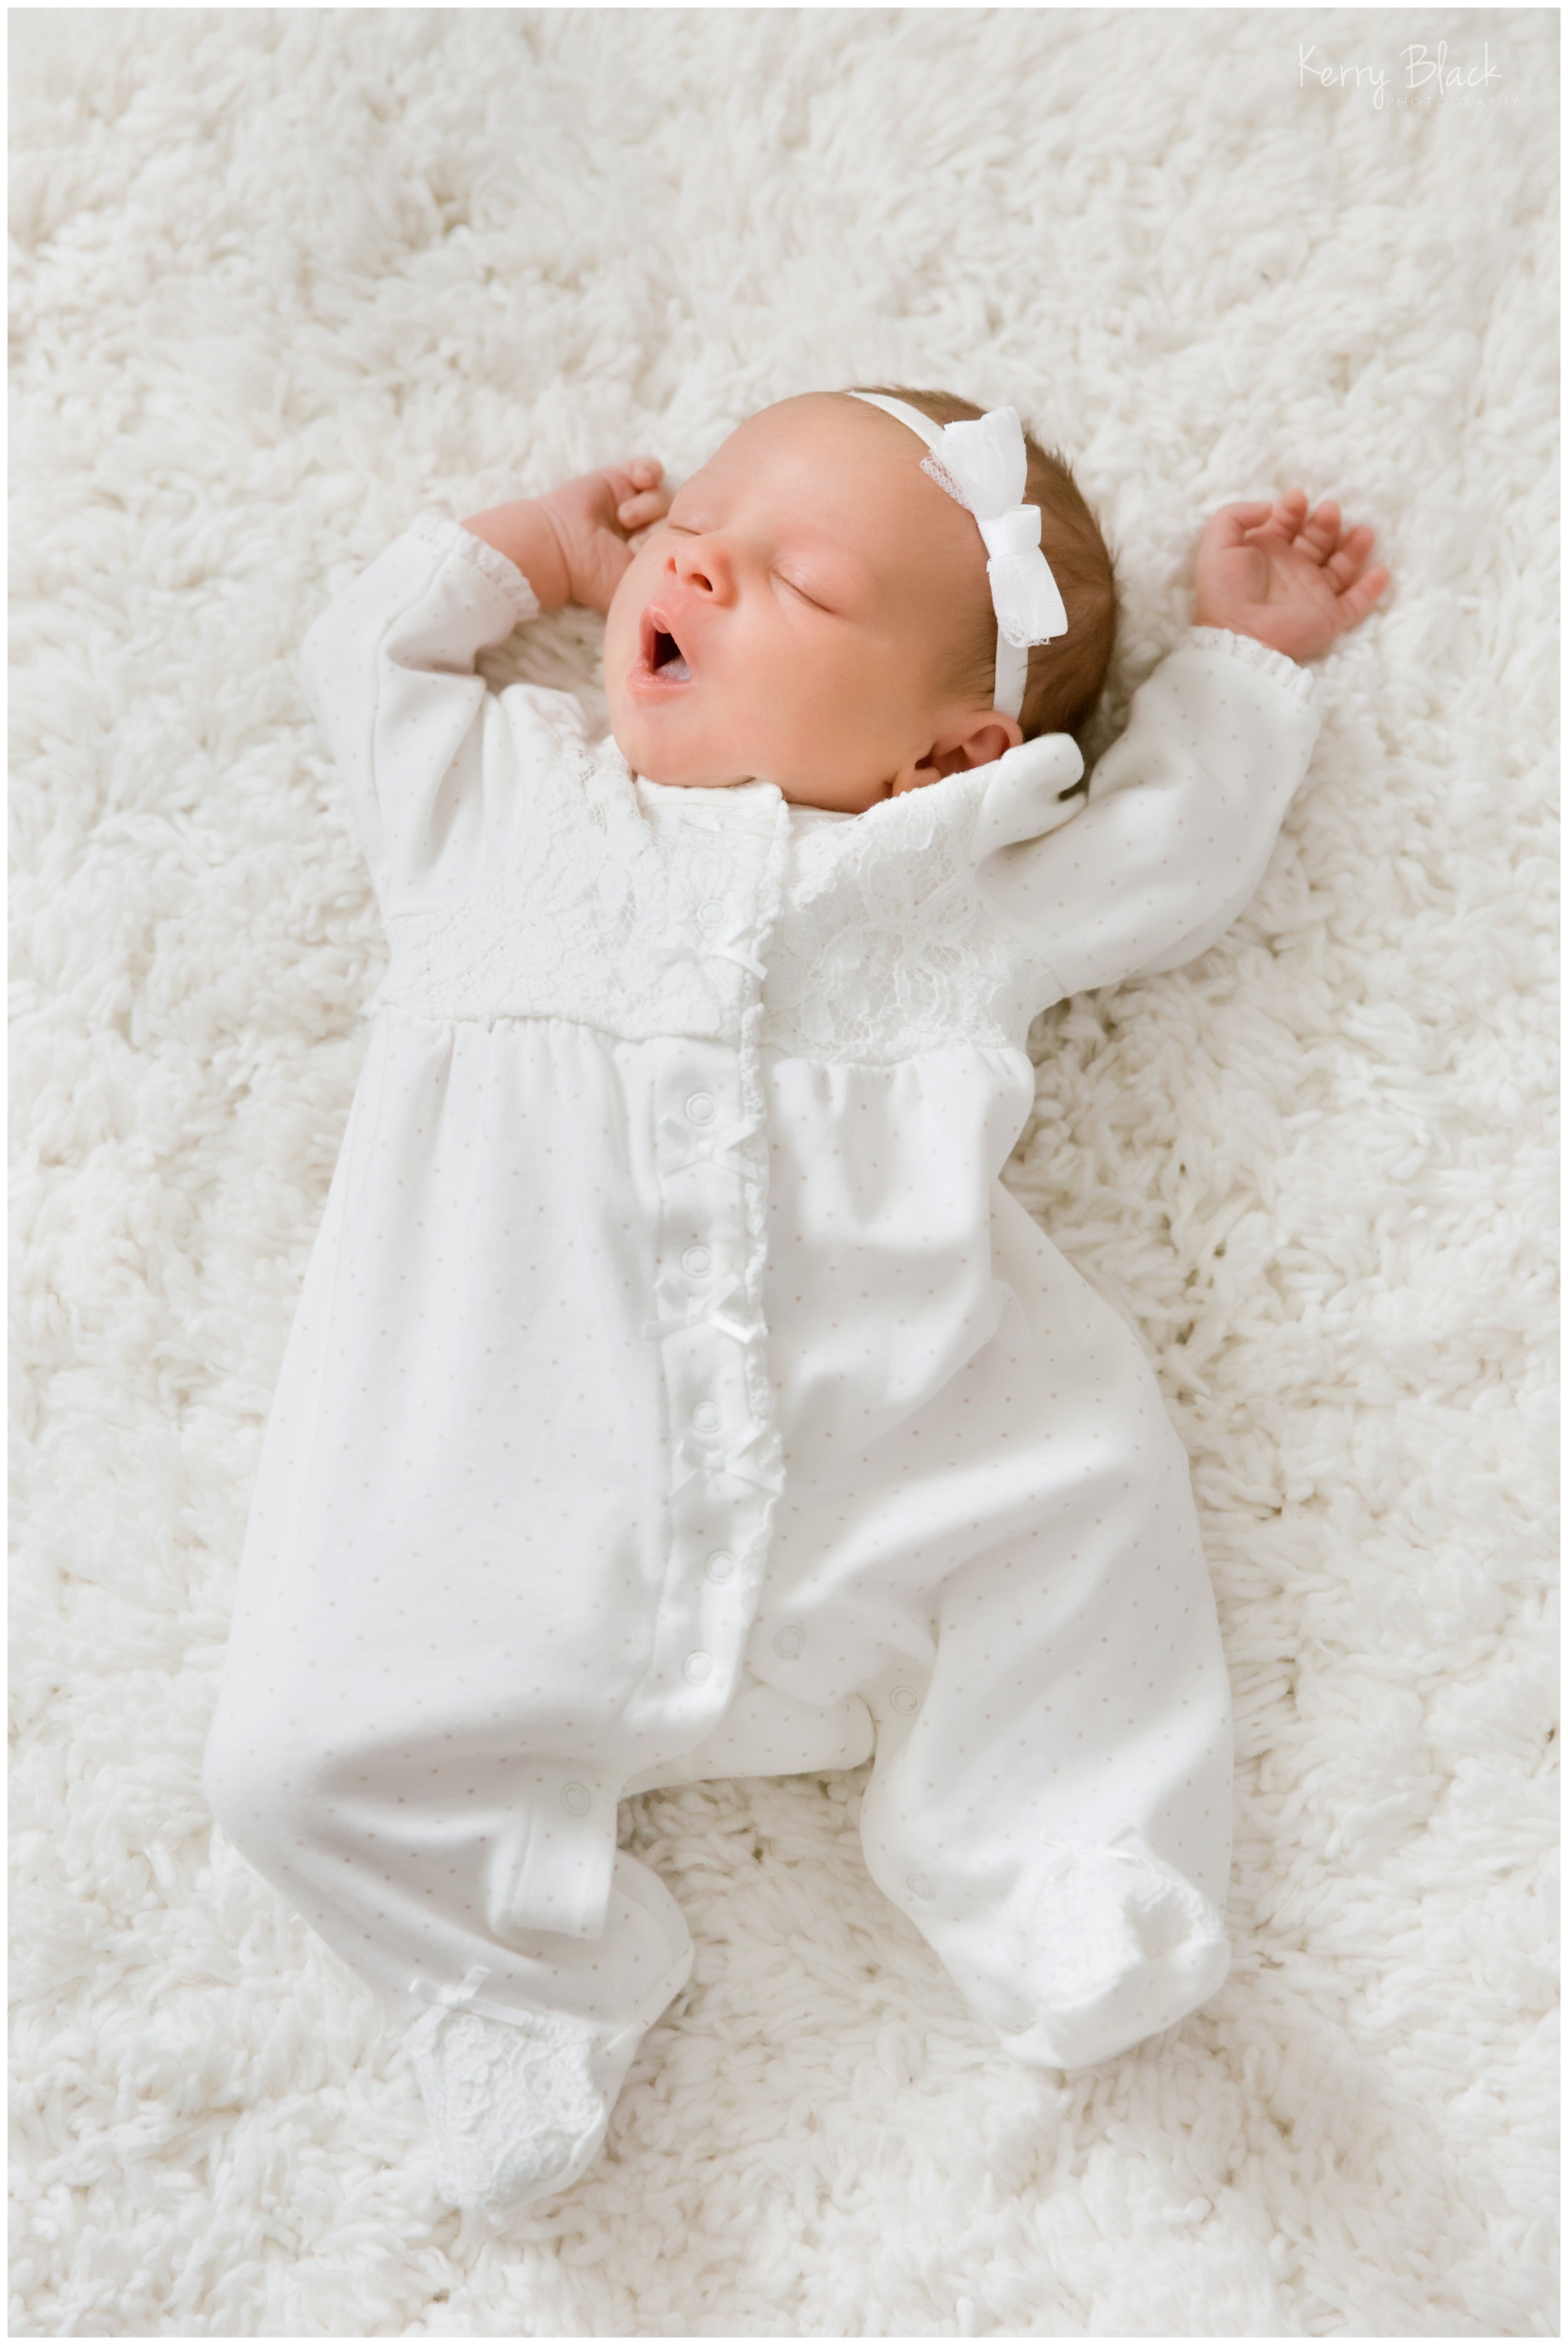 Meet Nora | In Home Lifestyle Newborn Session - Kerry Black Photography